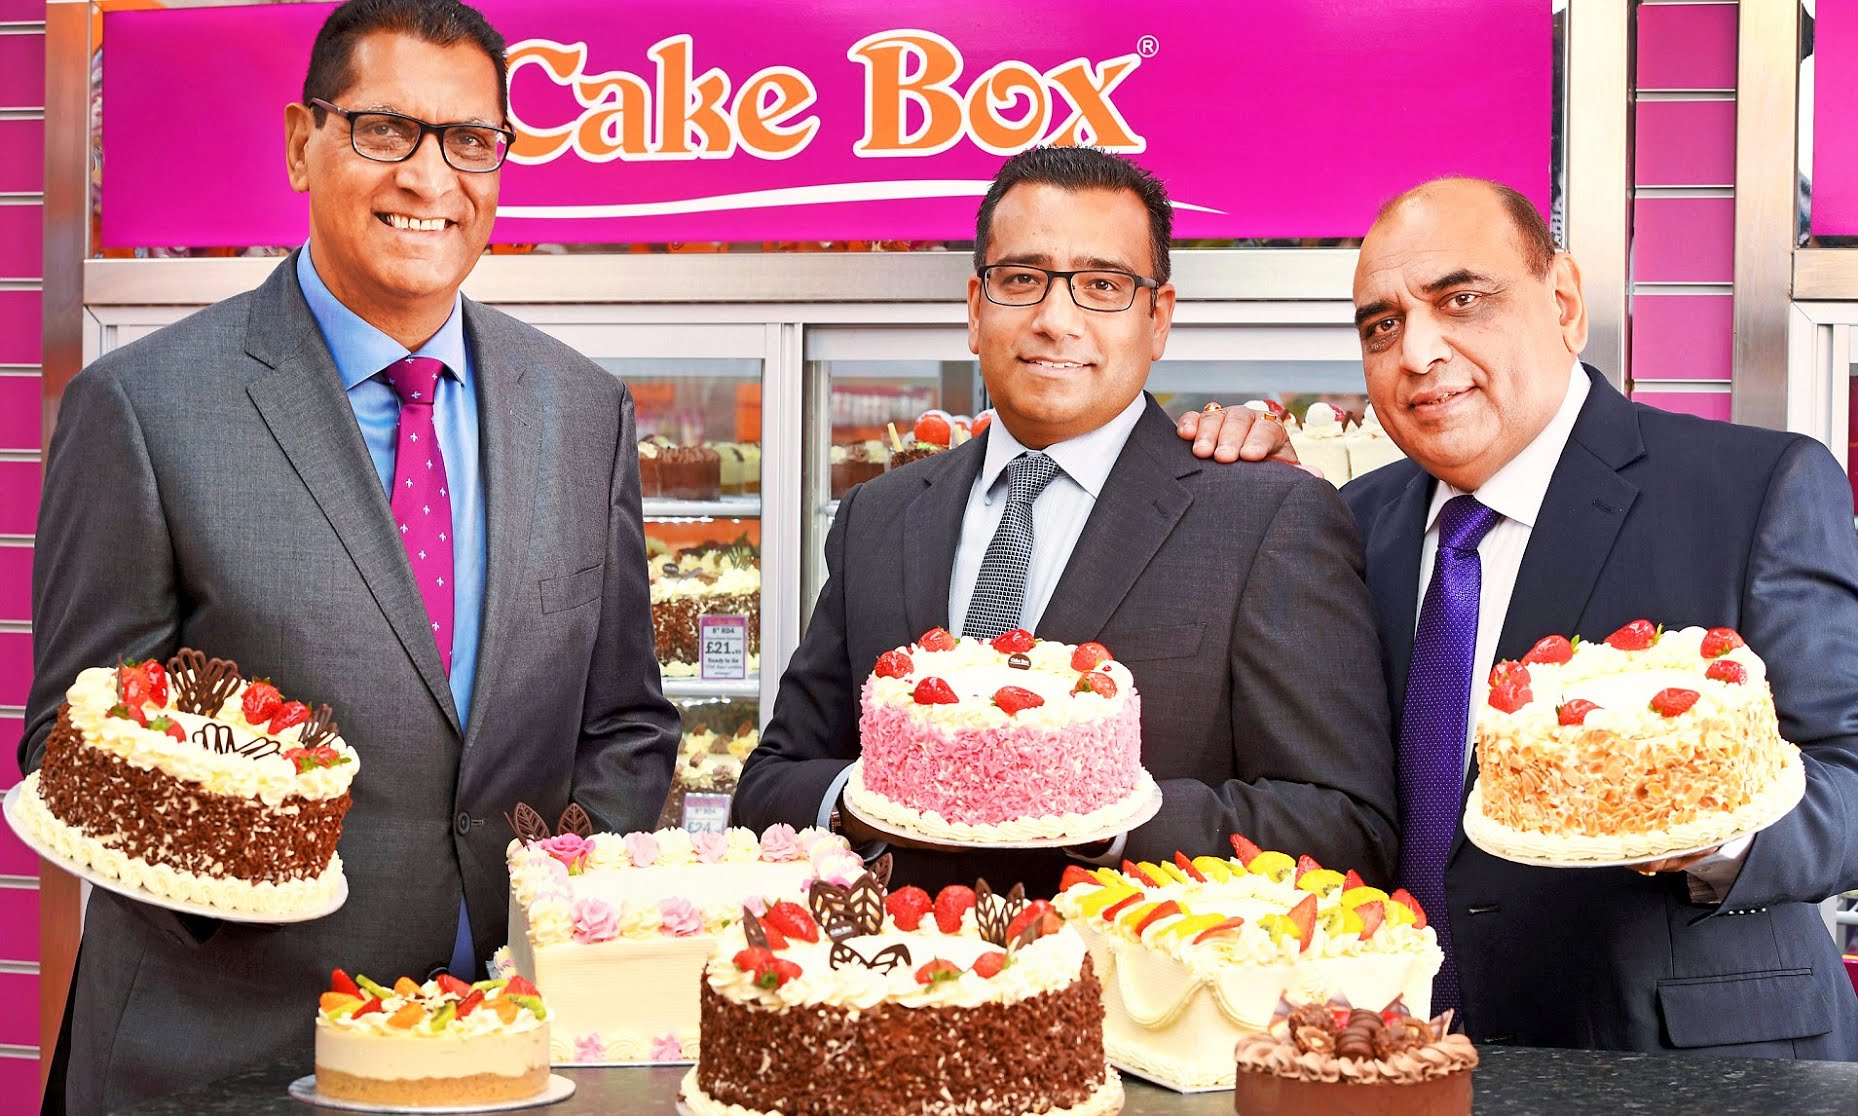 On Not Finding A Veg Cake For Their Family Cousins Build A 630 Cr Cake Company From Scratch